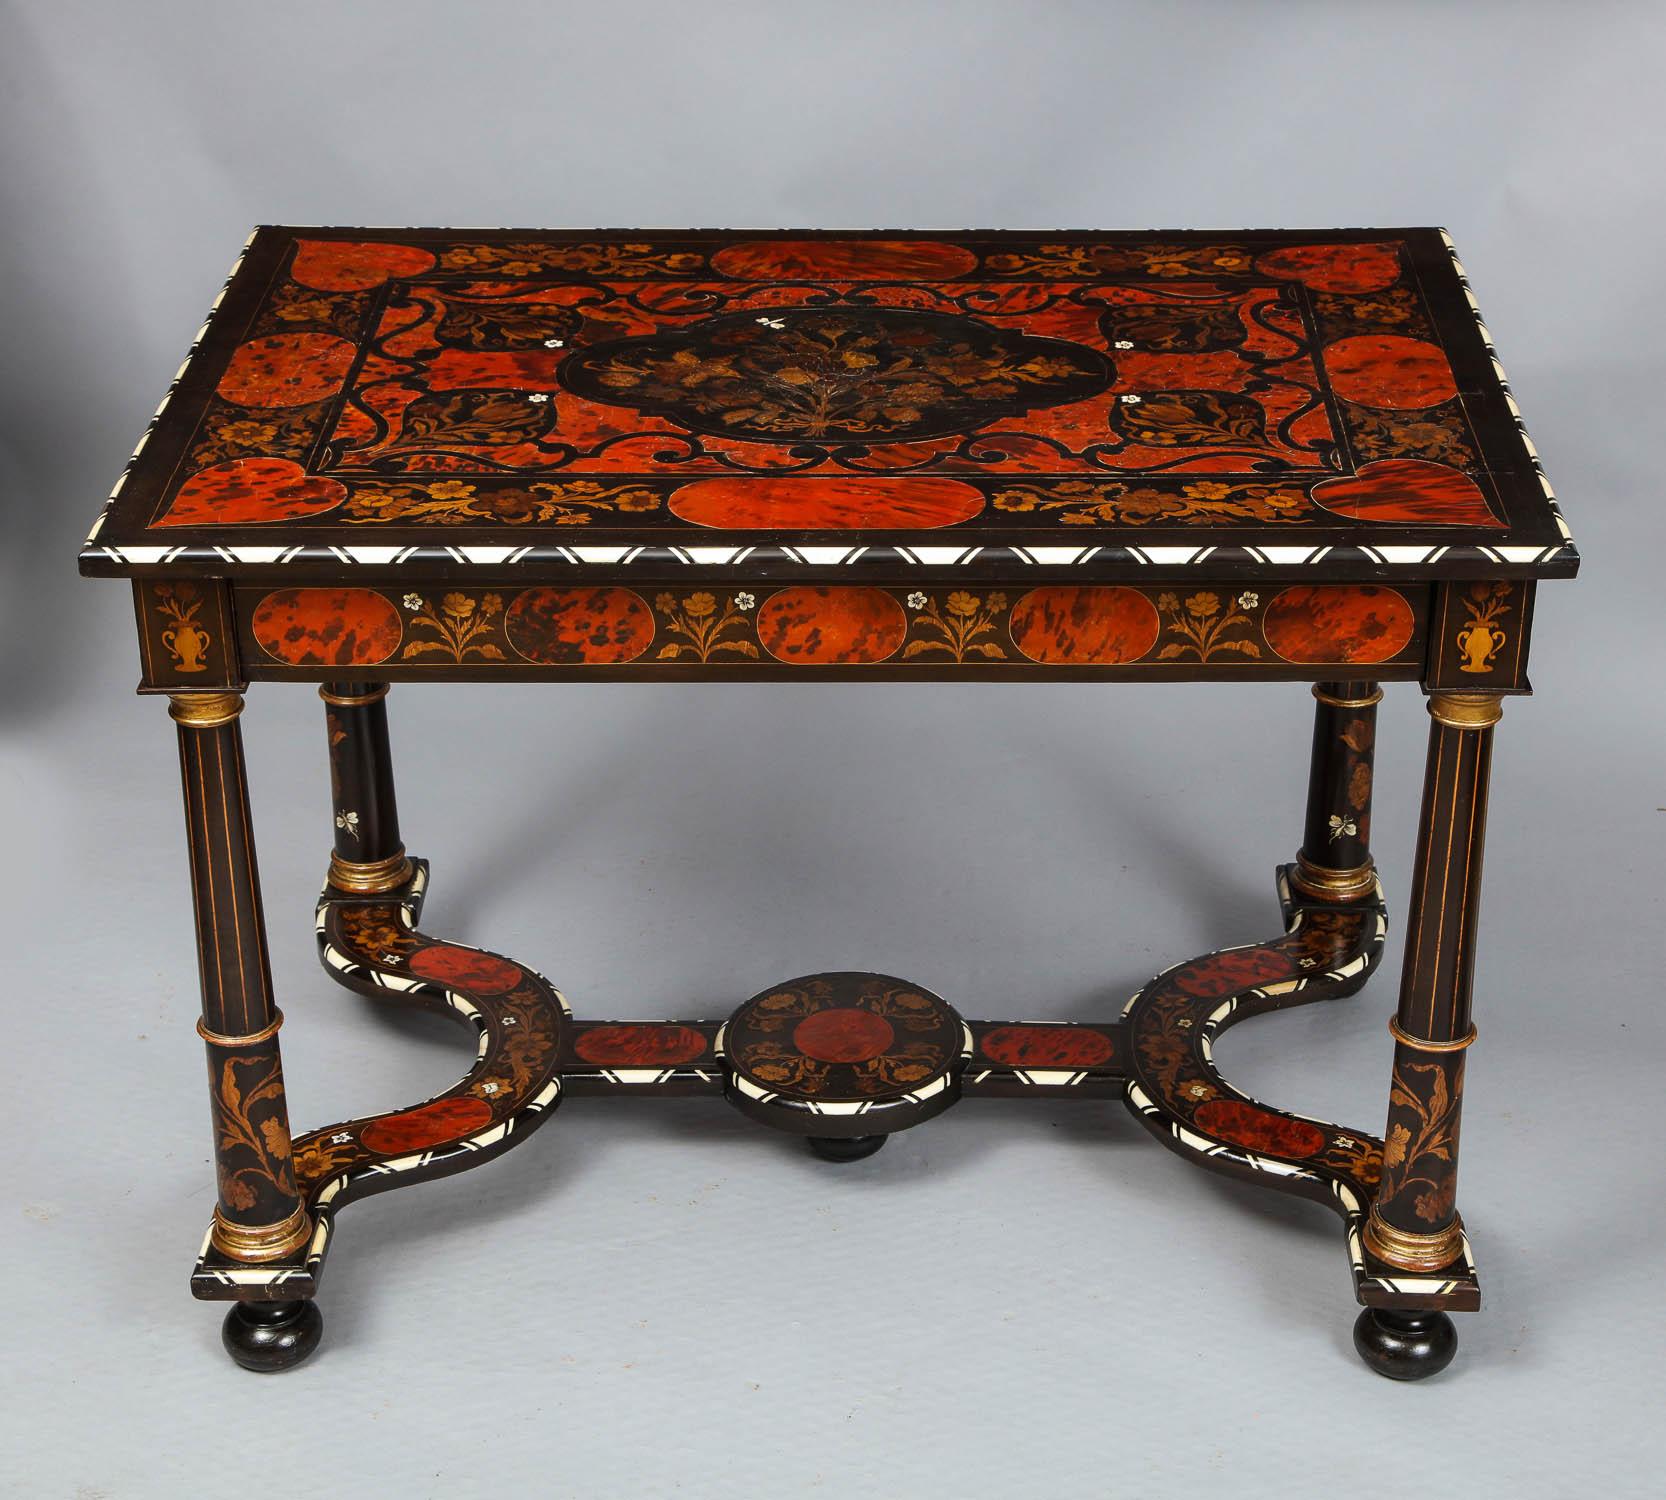 Belgian Flemish Baroque Marquetry Decorated Table For Sale